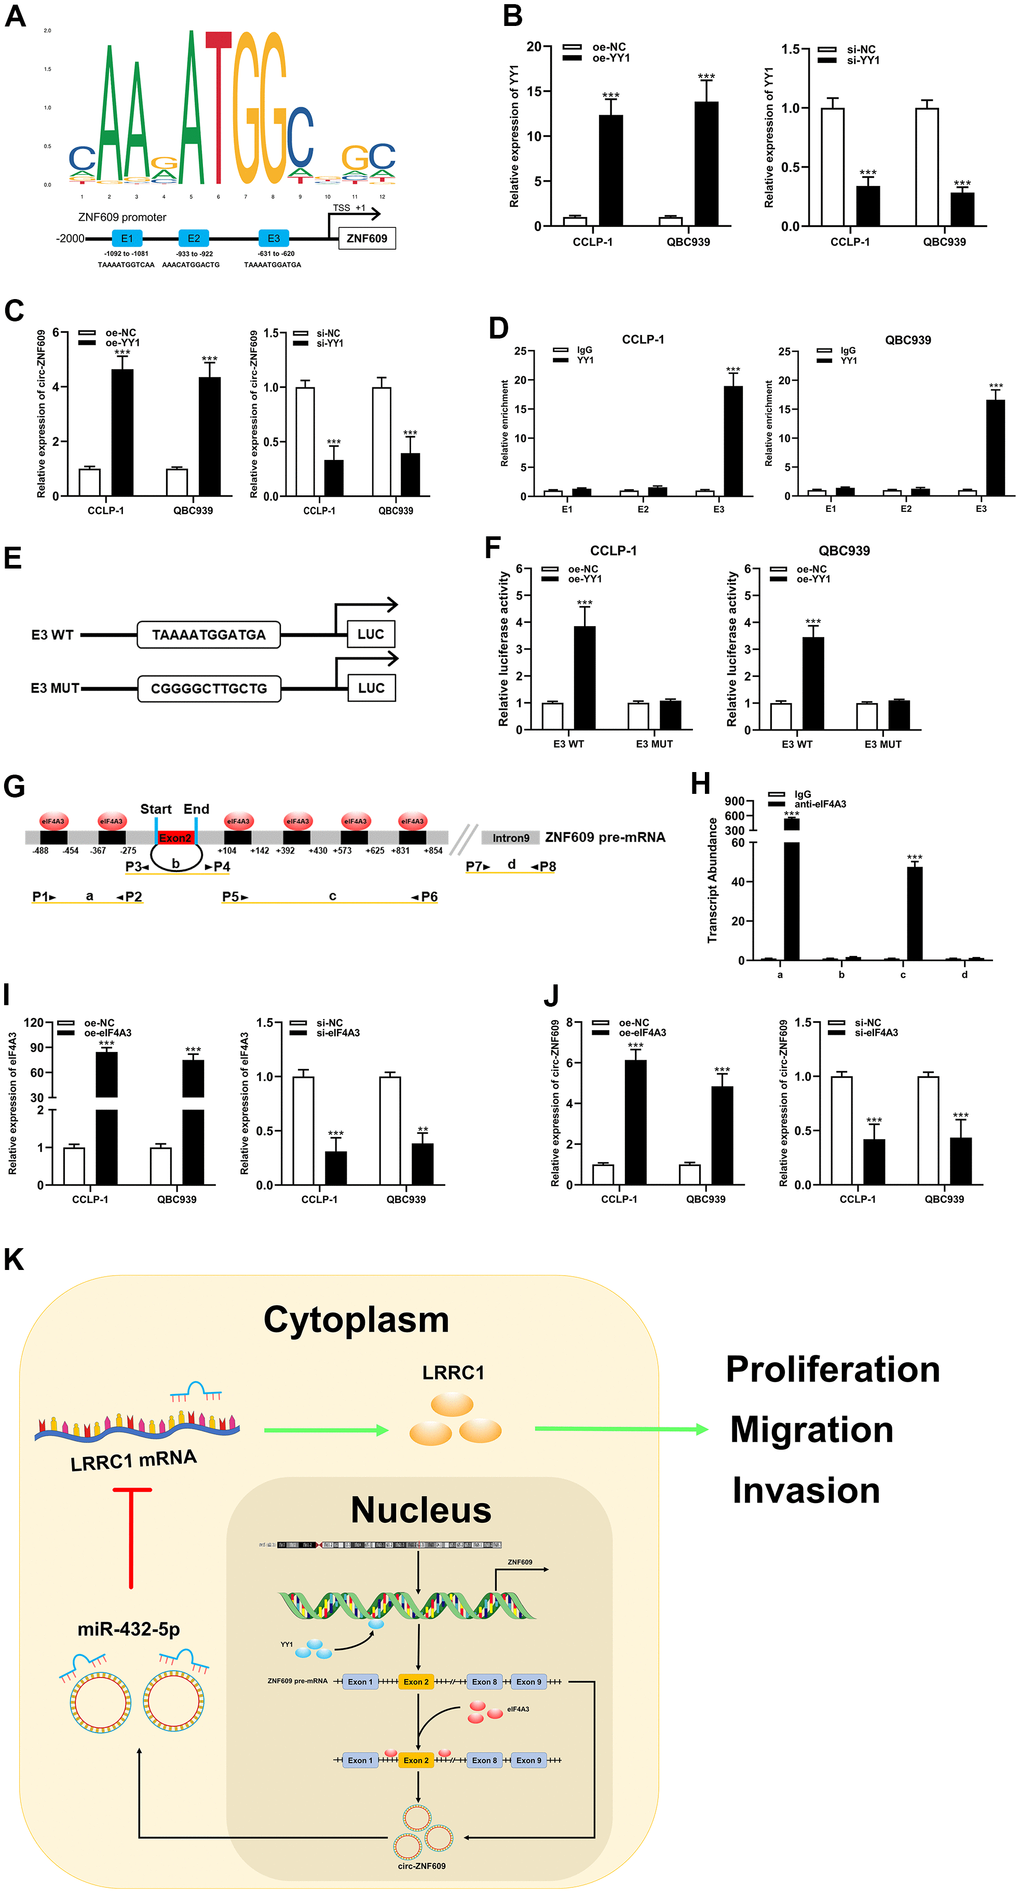 YY1 and eIF4A3 promoted circ-ZNF609 expression via linking to the circ-ZNF609 promoter and pre-mRNA, respectively. (A) YY1 sequence and binding sites (E1, E2 and E3) to circ-ZNF609 promoter region were predicted by using JASPAR database. (B) The efficiency detection of YY1 overexpression and siRNA transfection confirmed by qRT-PCR. (C) The circ-ZNF609 expression was detected in CCA with YY1 up-regulation and down-regulation by qRT-PCR. (D) ChIP assay was conducted to affirm the direct binding of YY1 to circ-ZNF609 promoter in QBC939 and CCLP-1 cells. (E) Schematic diagram of plasmids construction. (F) The luciferase activity of E3 wild type was markedly promoted by oe-YY1 co-transfection compared with controls in CCA cells. (G) The prediction results of circinteractome database indicated that eIF4A3 had binding sites in the upstream and downstream regions of circ-ZNF609 pre-mRNA. (H) The results of RIP demonstrated that eIF4A3 could directly bind to the circ-ZNF609 pre-mRNA in CCA cells. (I) Knockdown efficiency and amplification efficiency of eIF4A3 confirmed by qRT-PCR. (J) The expression of circ-ZNF609 in CCLP-1 and QBC939 transfected with high expression eIF4A3 and low expression eIF4A3 was detected by qRT-PCR. (K) Schematic diagram of circ-ZNF609 tumorigenesis mechanisms in cholangiocarcinoma. **PP